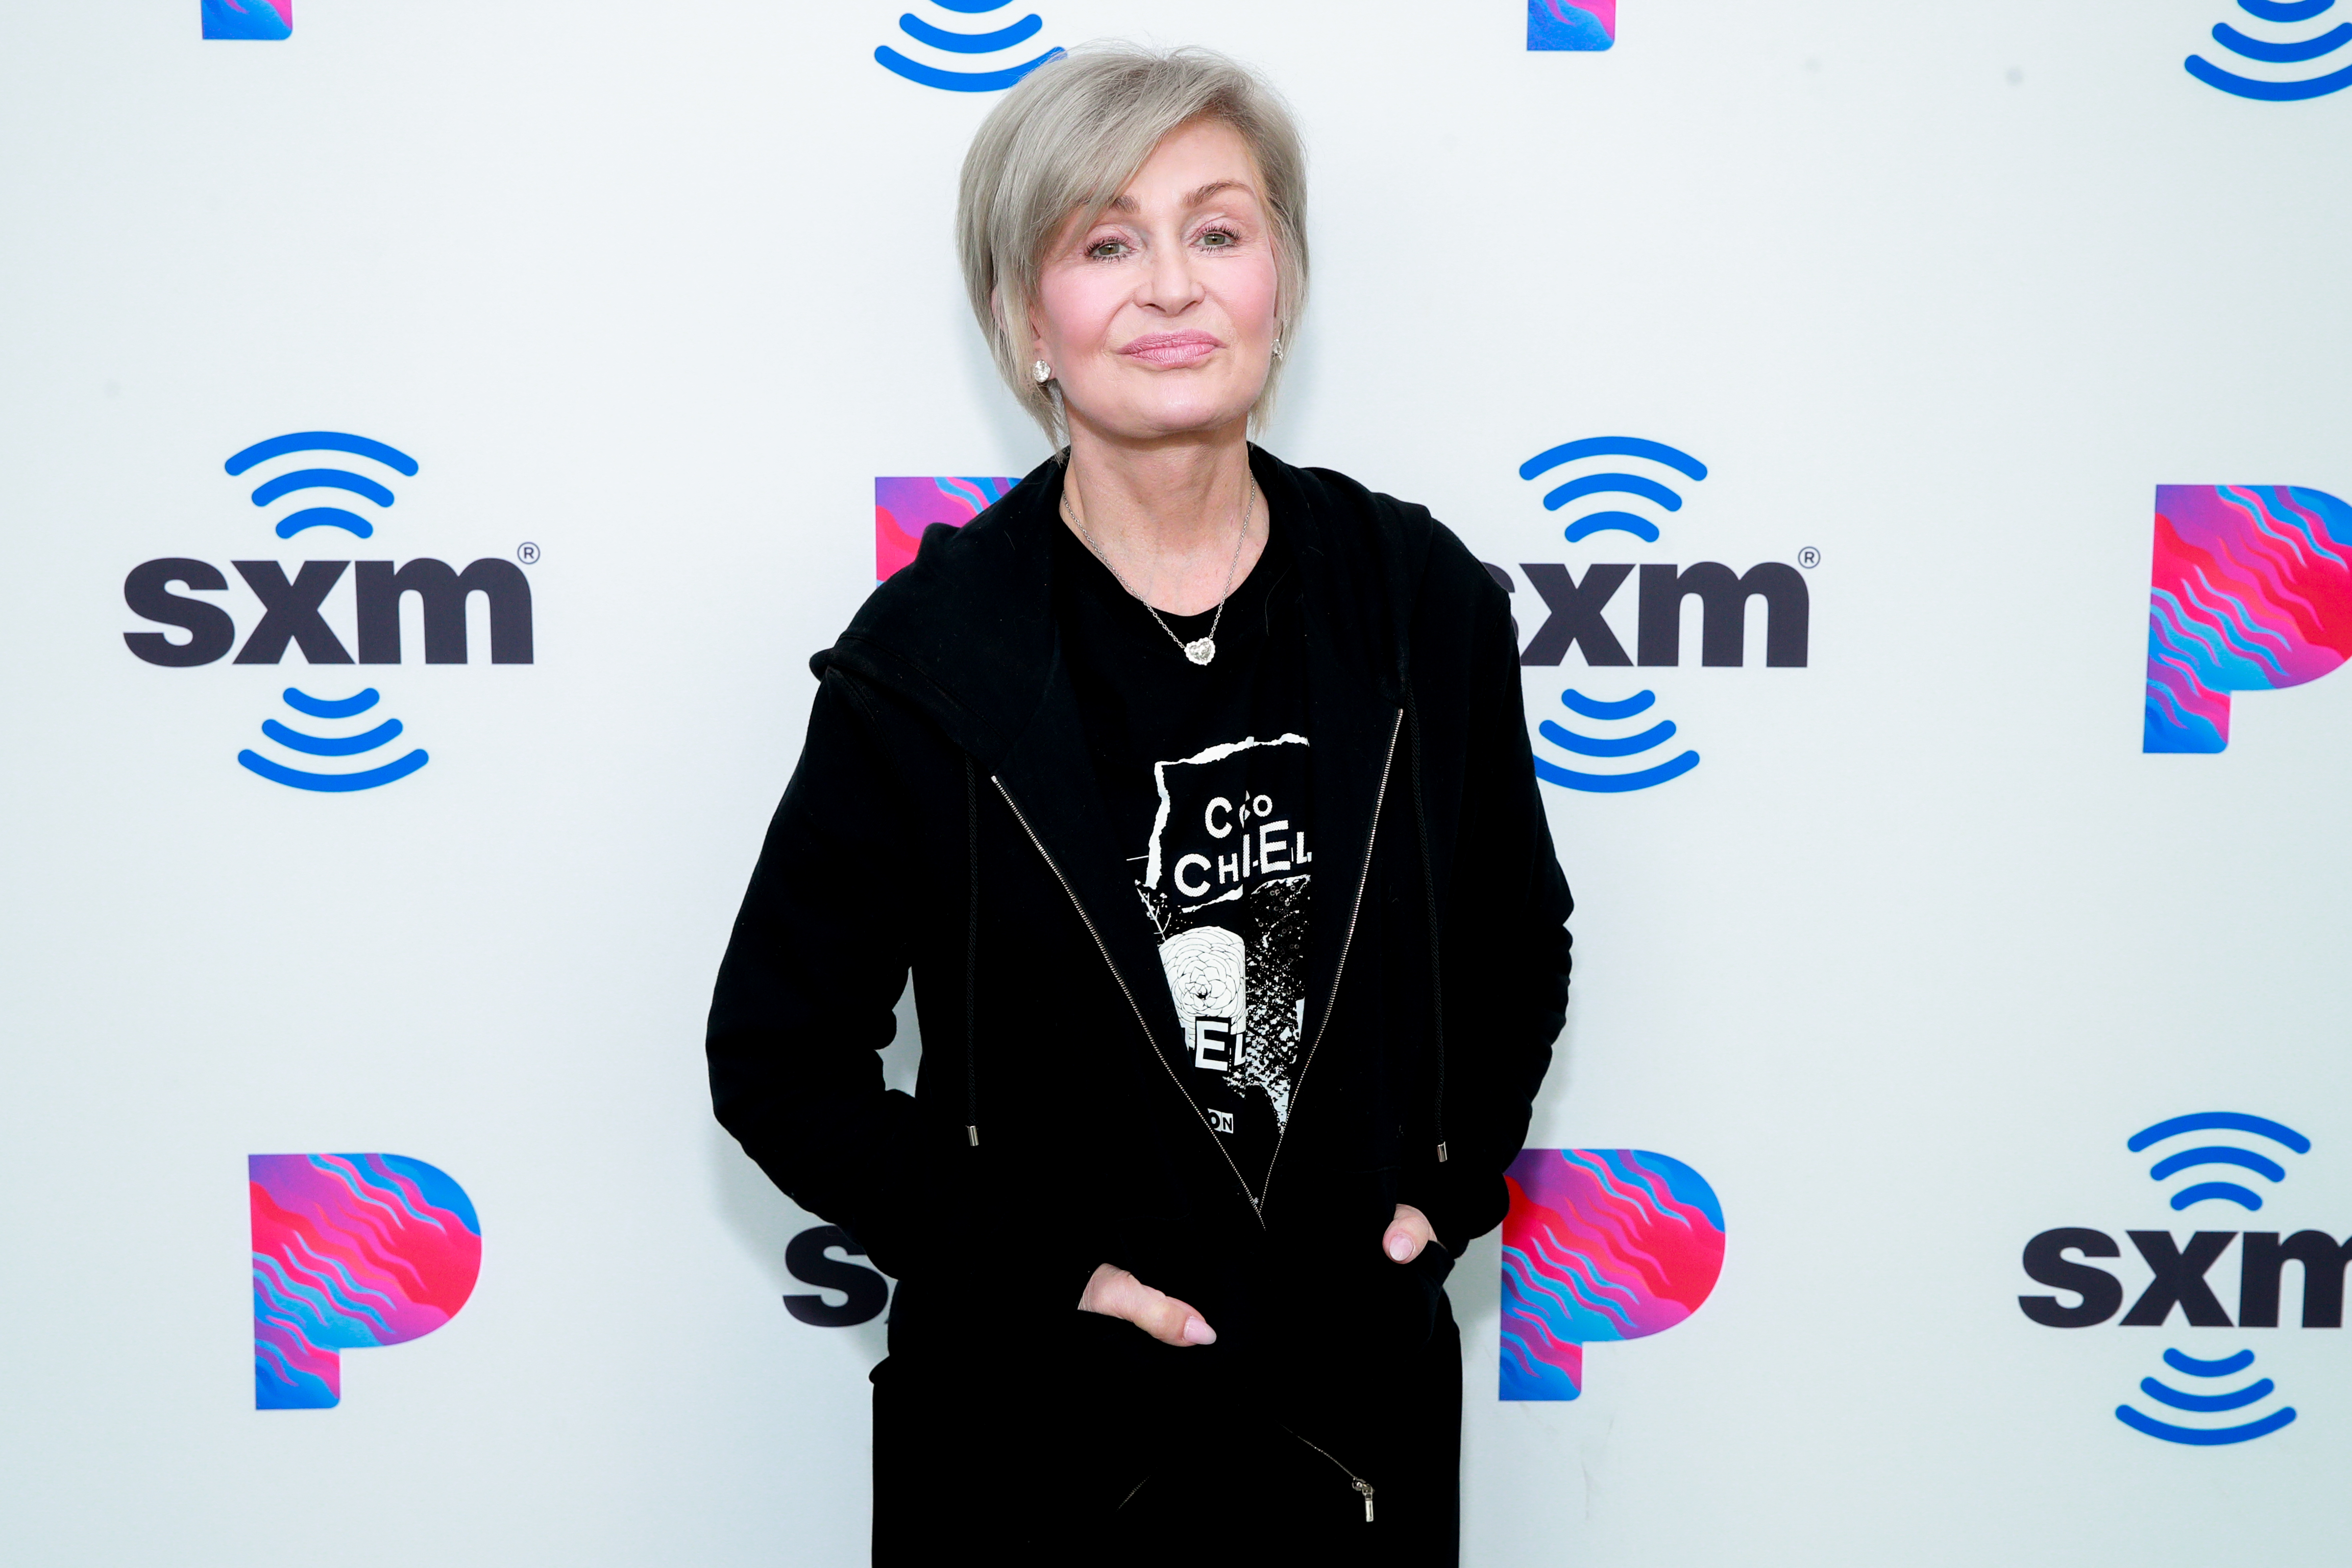 Sharon Osbourne at the SiriusXM Studio on February 27, 2020 in Los Angeles, California | Source: Getty Images